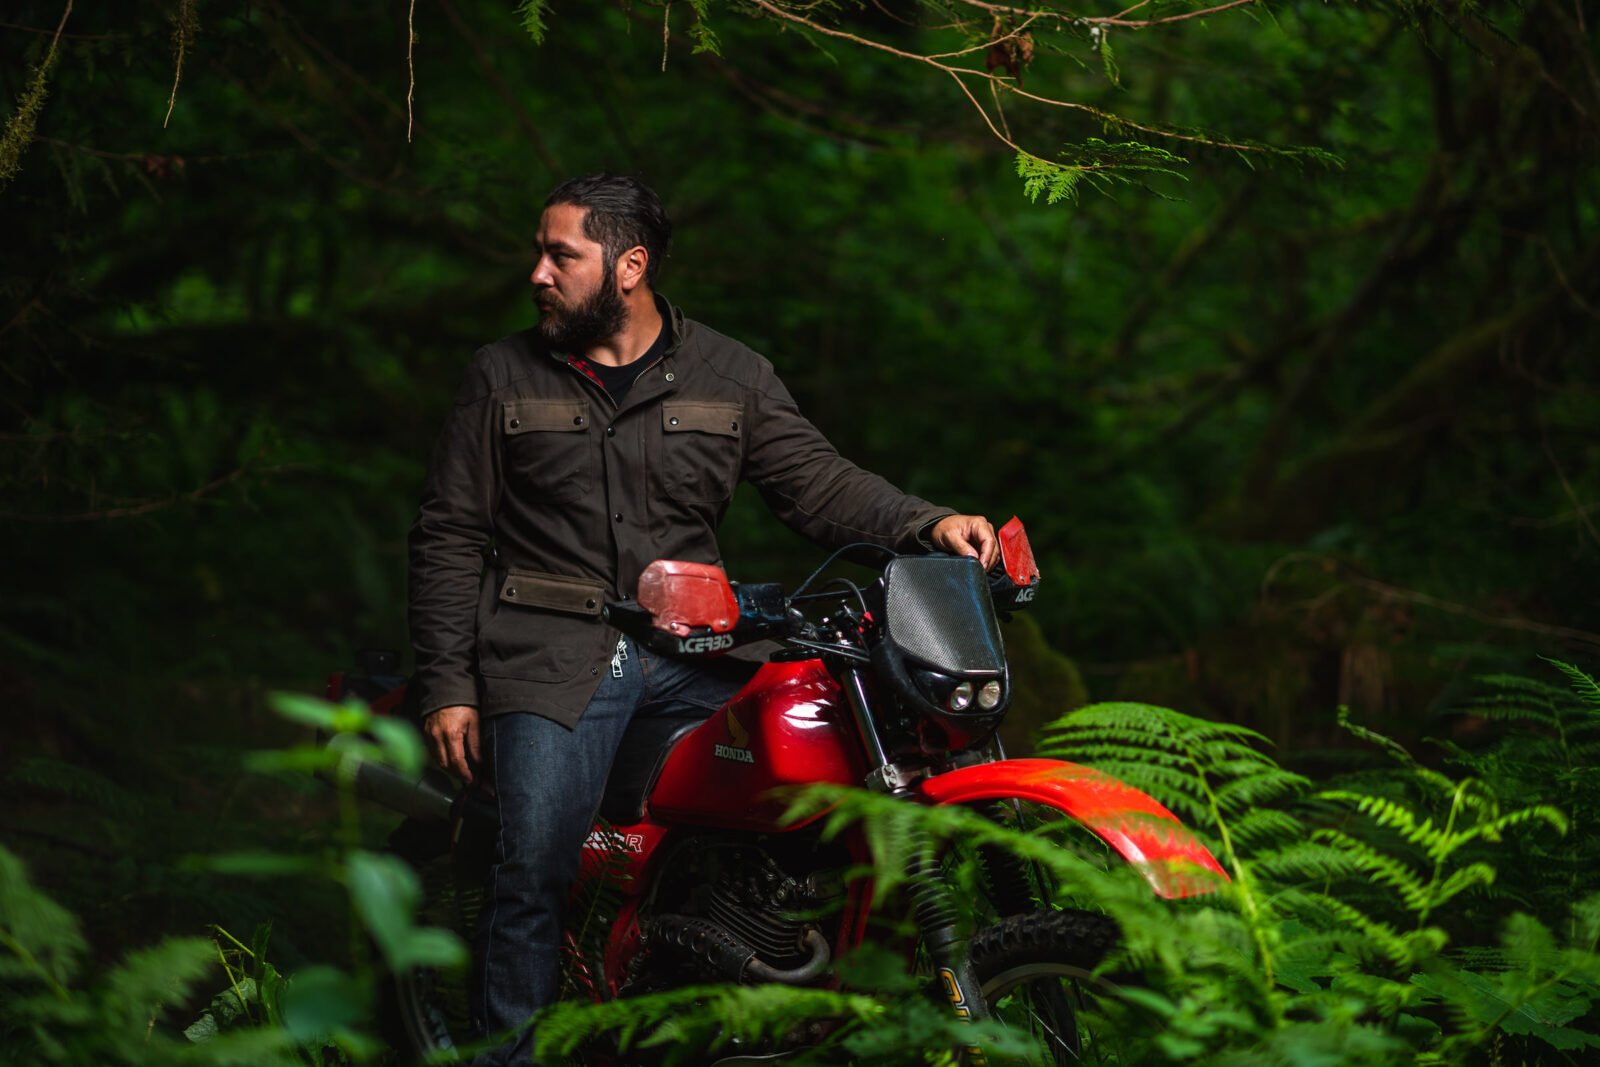 The McCoy Motorcycle Jacket by Tobacco Motorwear Company